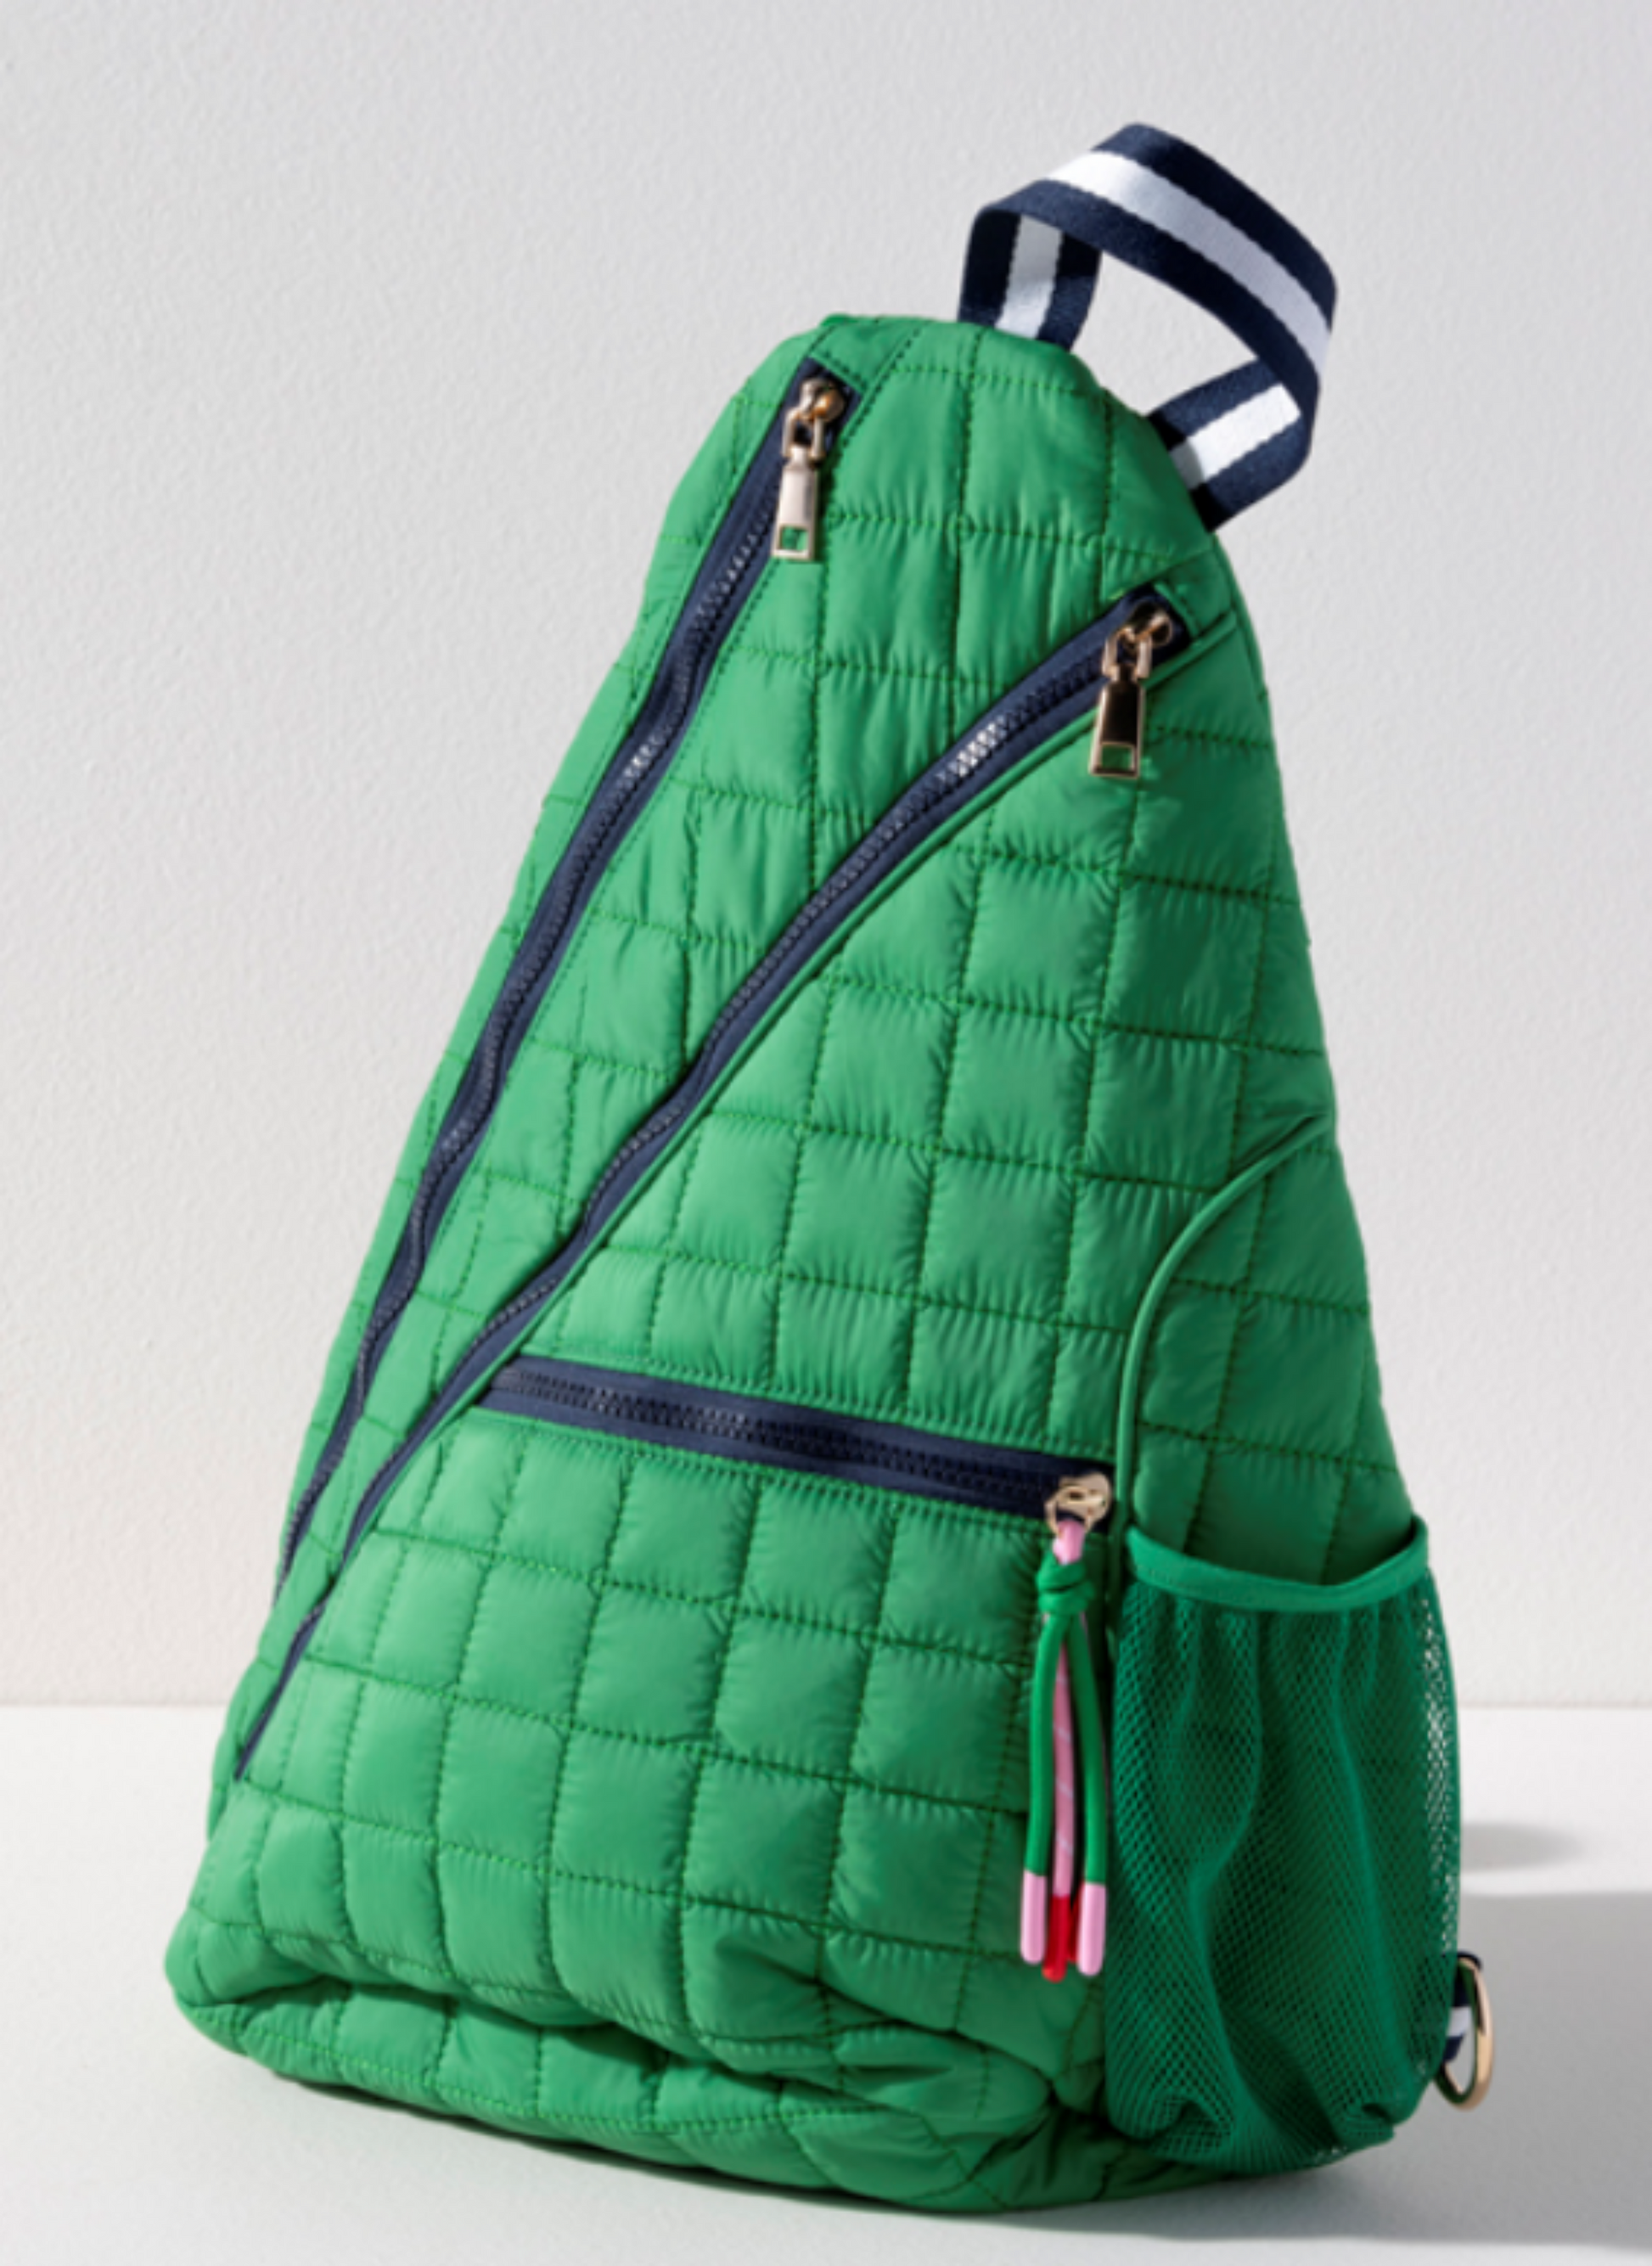 Kelly green quilted nylon tennis and pickleball sling backpack with navy zippers and navy white striped strap